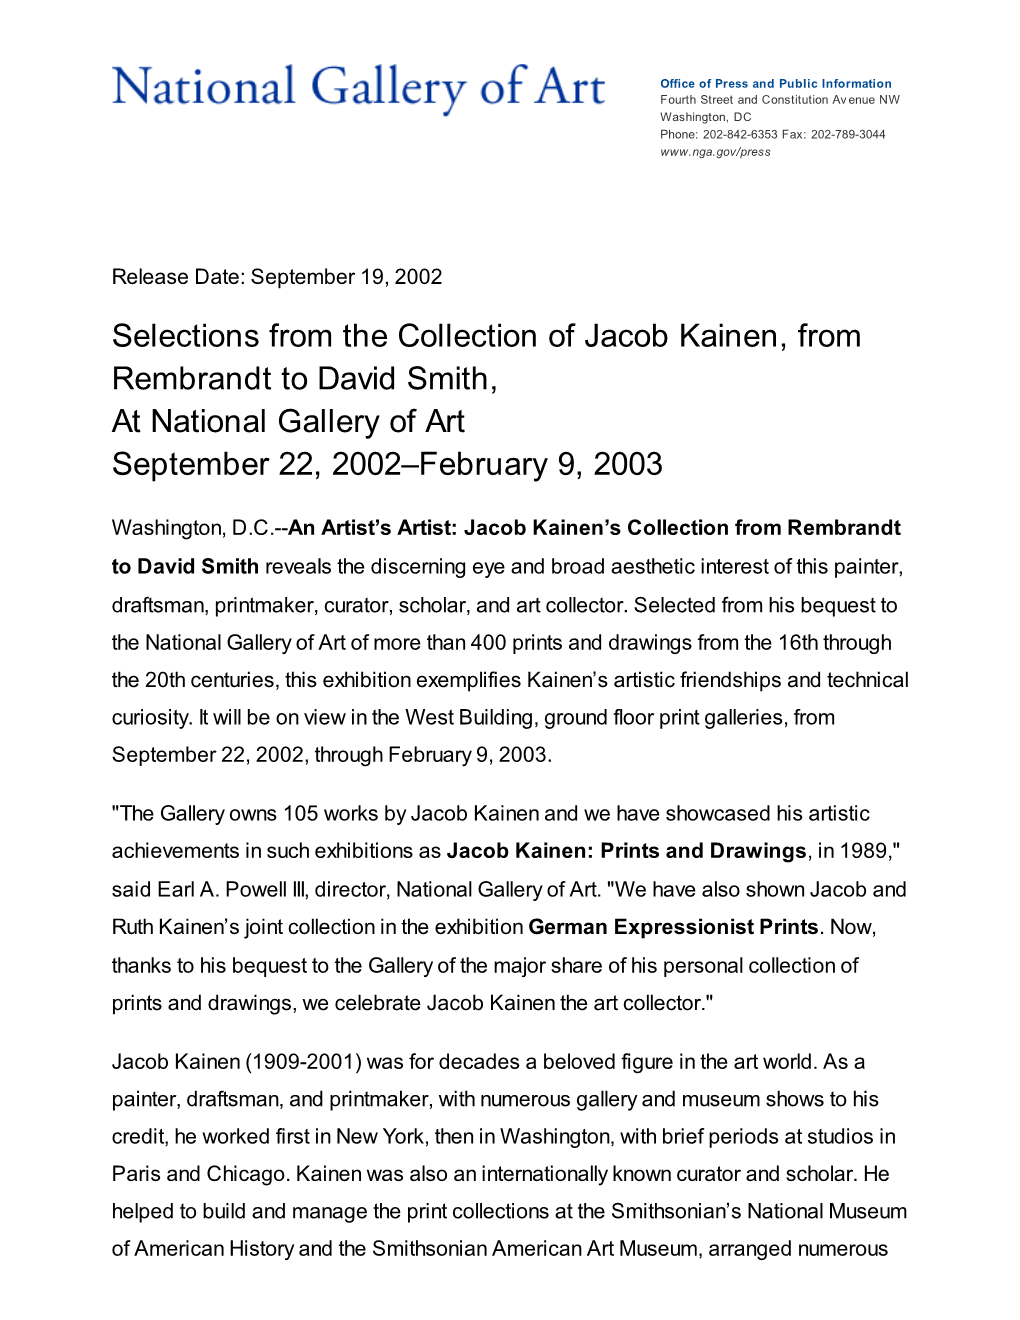 Selections from the Collection of Jacob Kainen, from Rembrandt to David Smith, at National Gallery of Art September 22, 2002–February 9, 2003